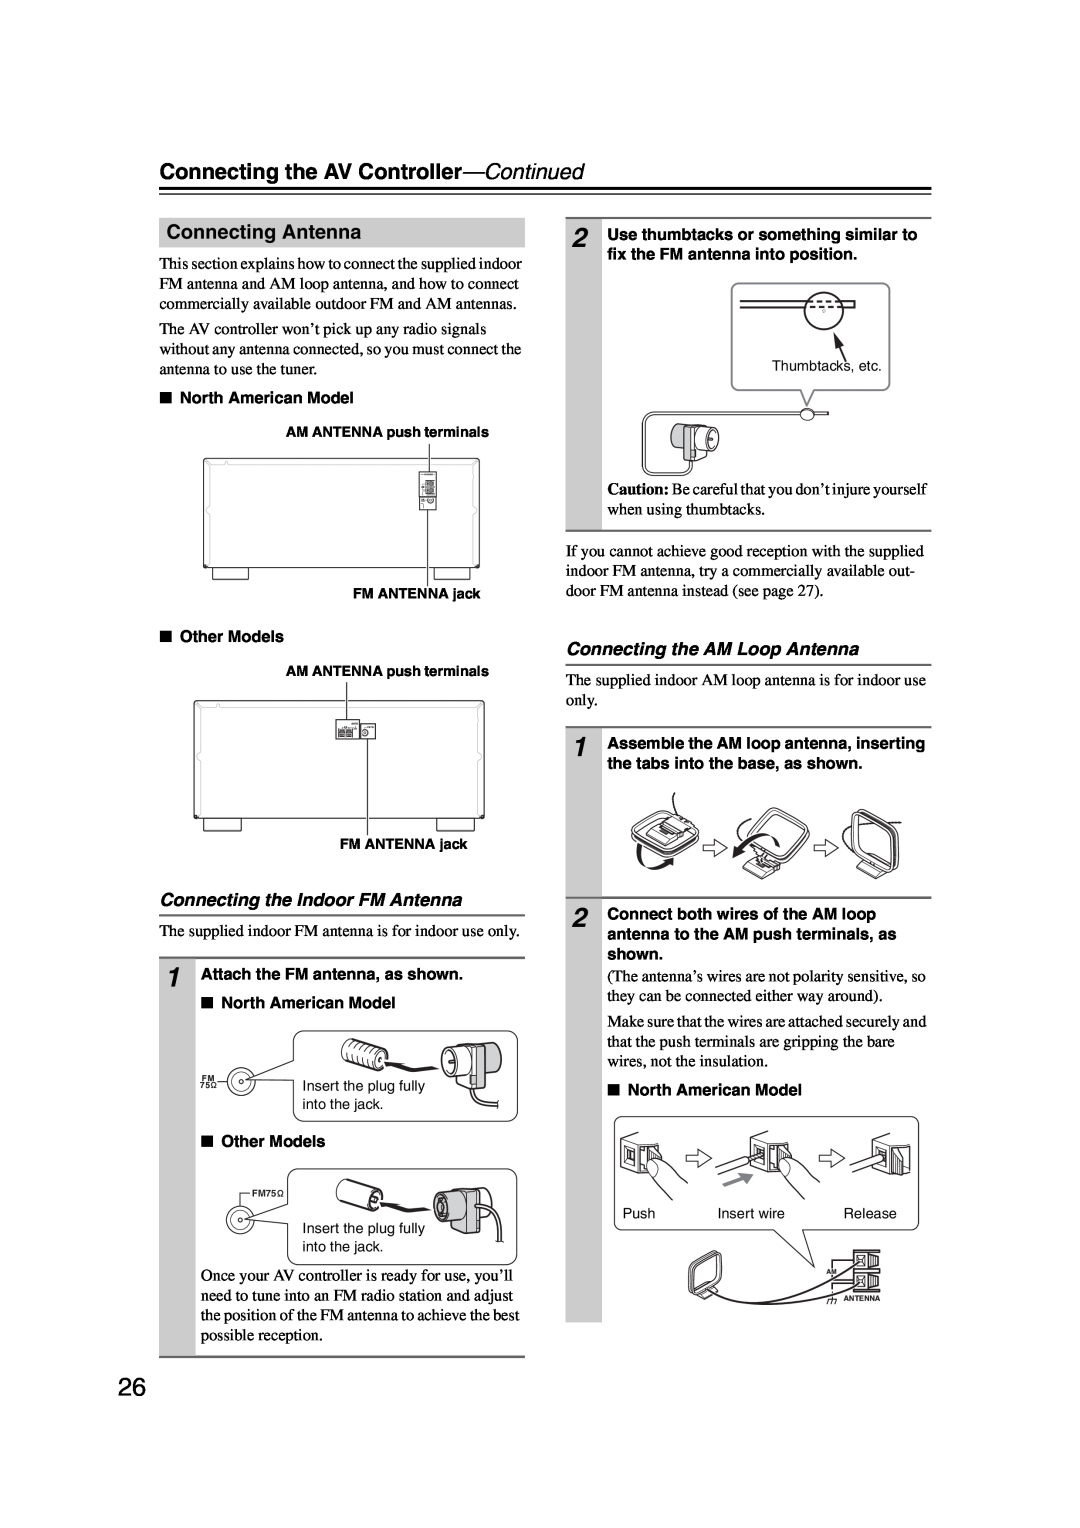 Integra DHC-9.9 instruction manual Connecting Antenna, Connecting the Indoor FM Antenna, Connecting the AM Loop Antenna 